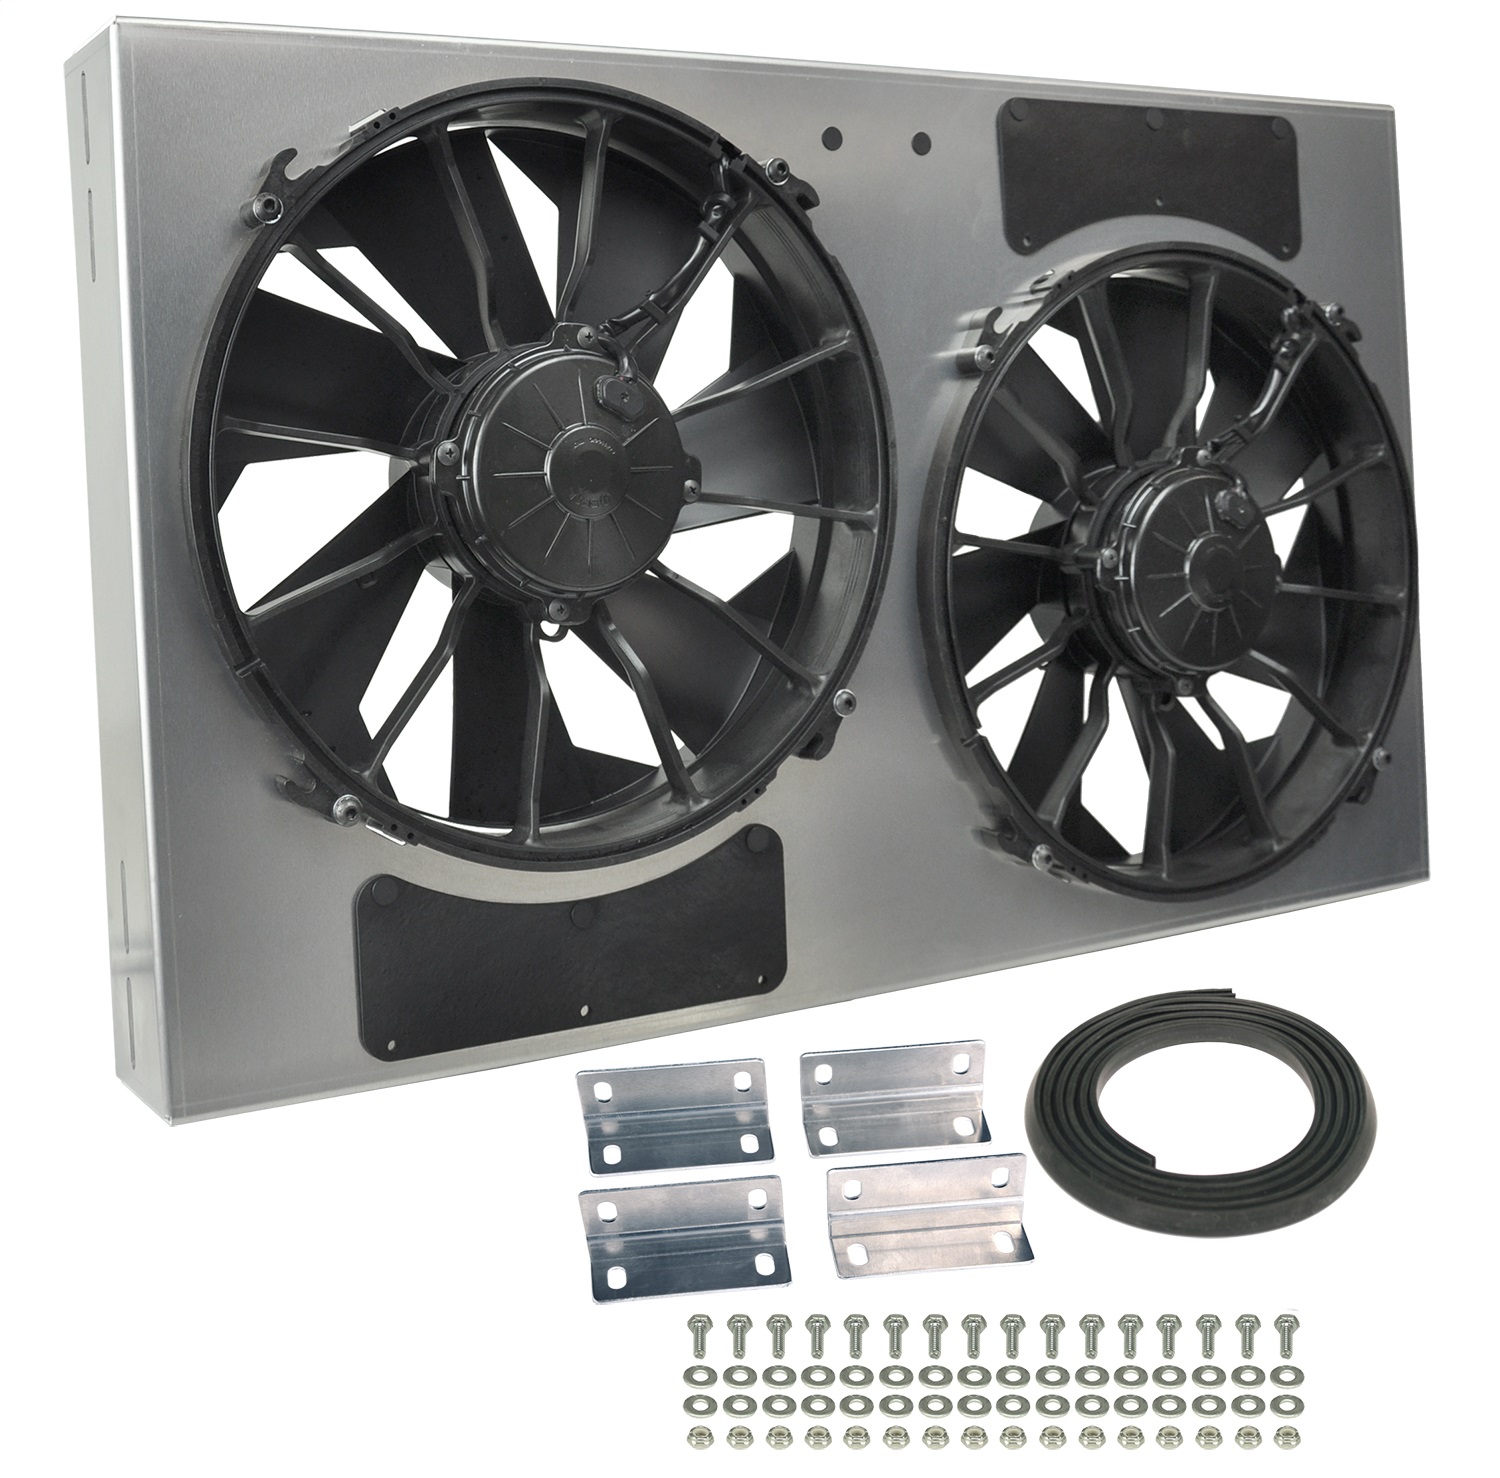 Derale 16823 Radiator Fan with Aluminum Shroud Assembly 